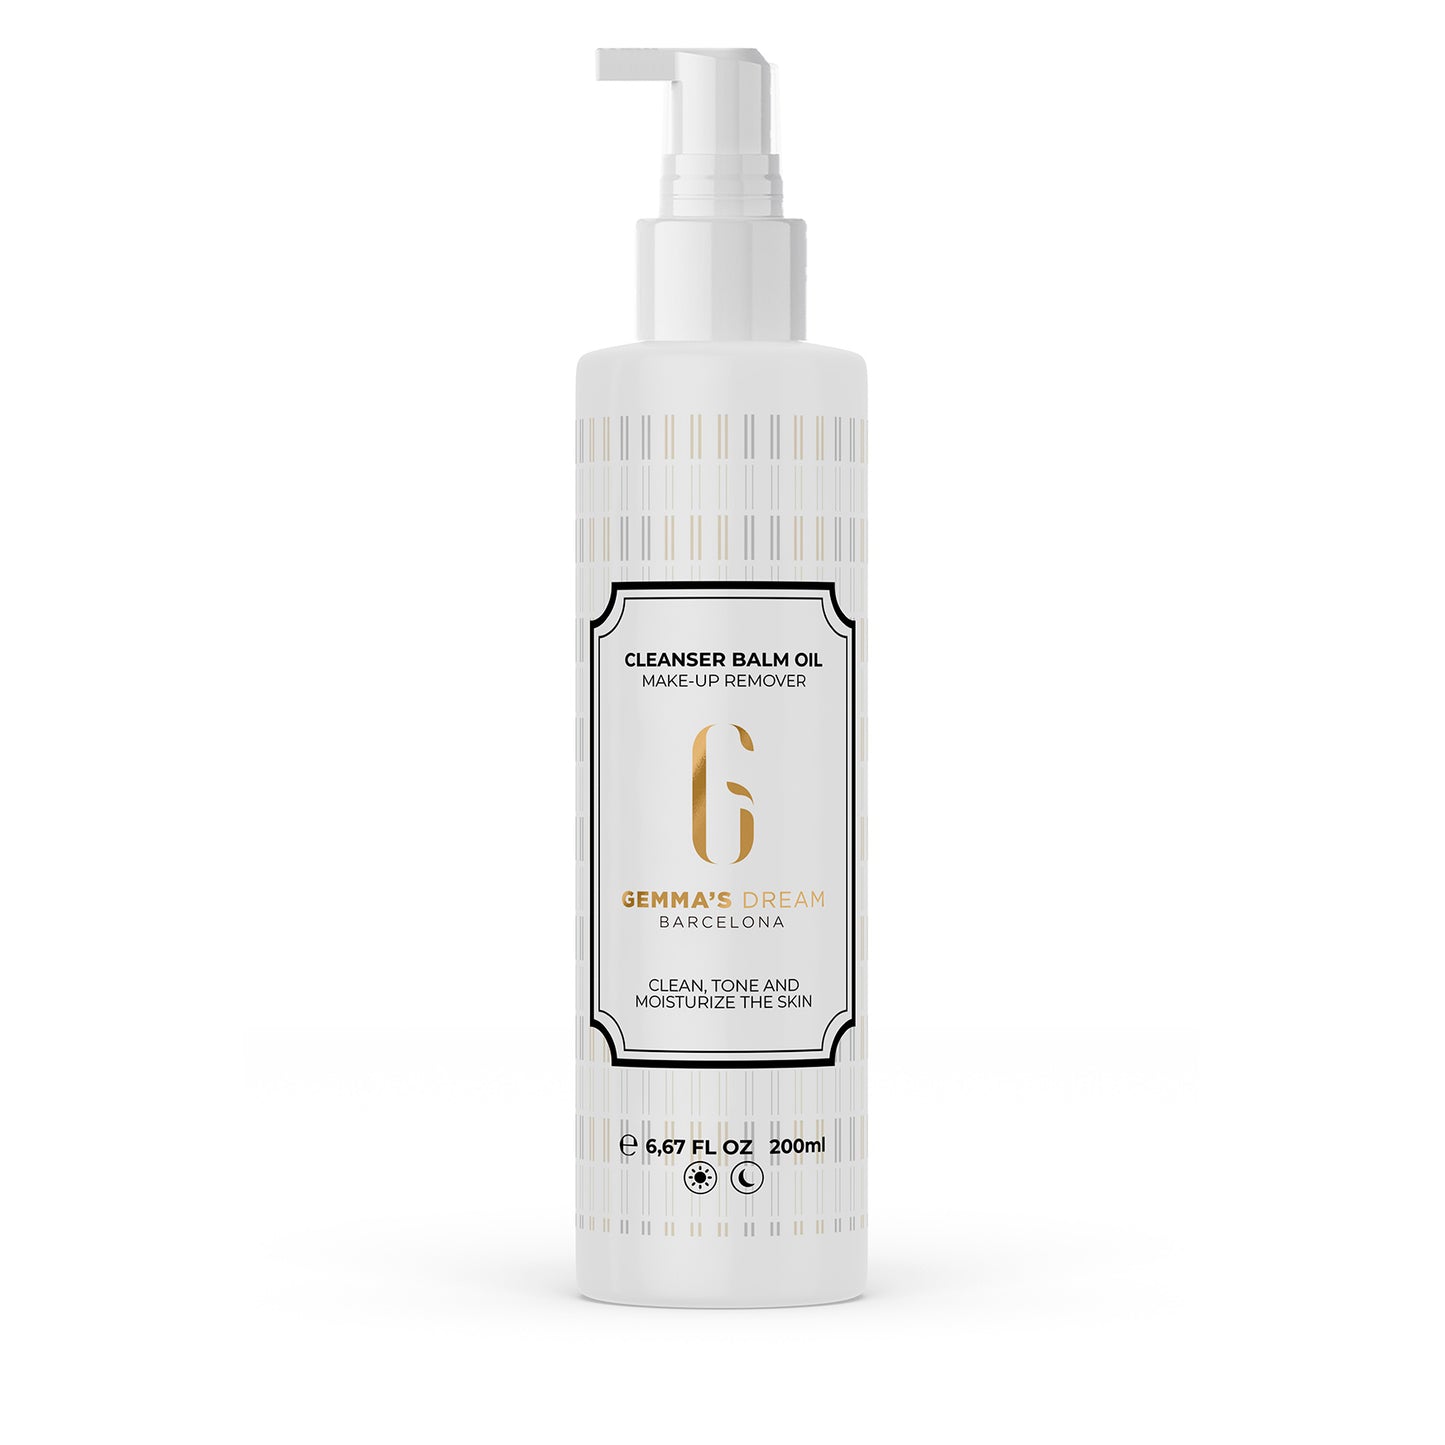 New Cleanser Balm Oil, made with a combination of different kind of oils  like avocado, sunflower, coconot, argan, 